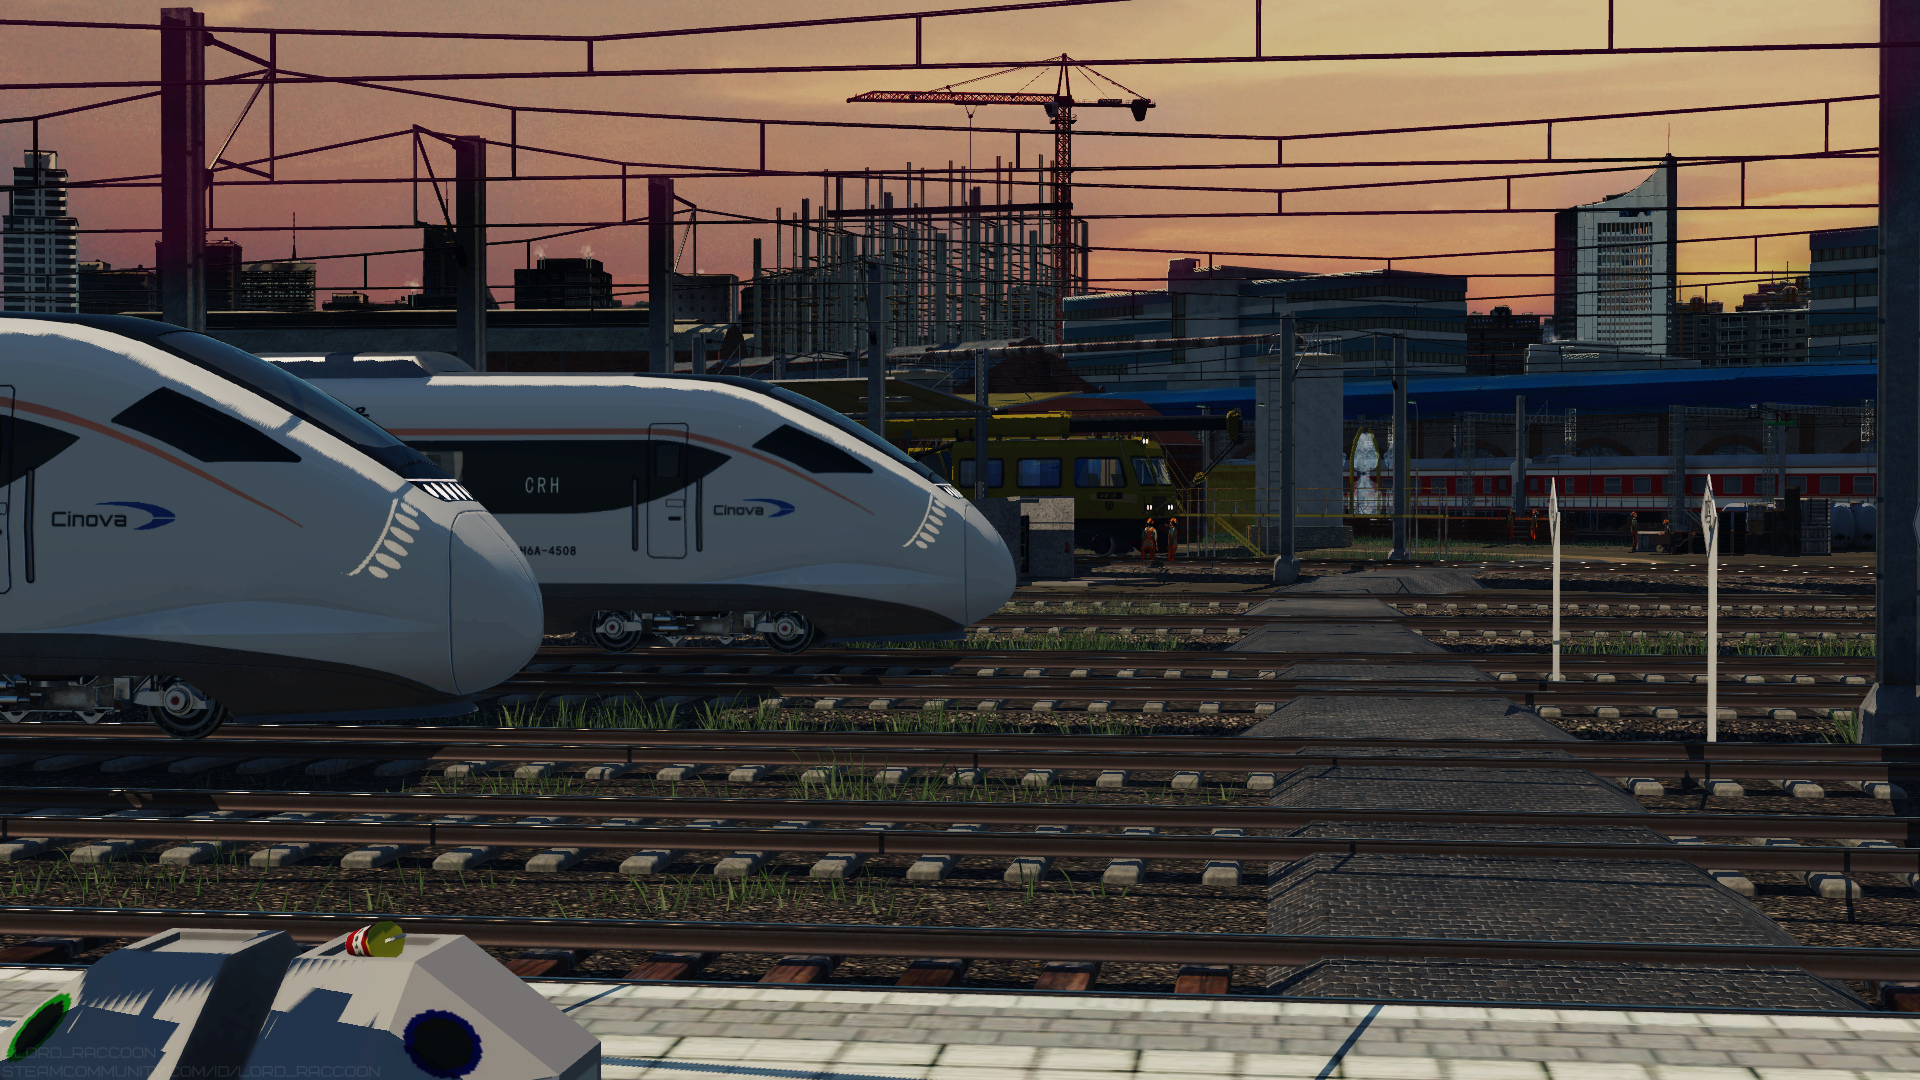 CRH6A waiting to proceed on station